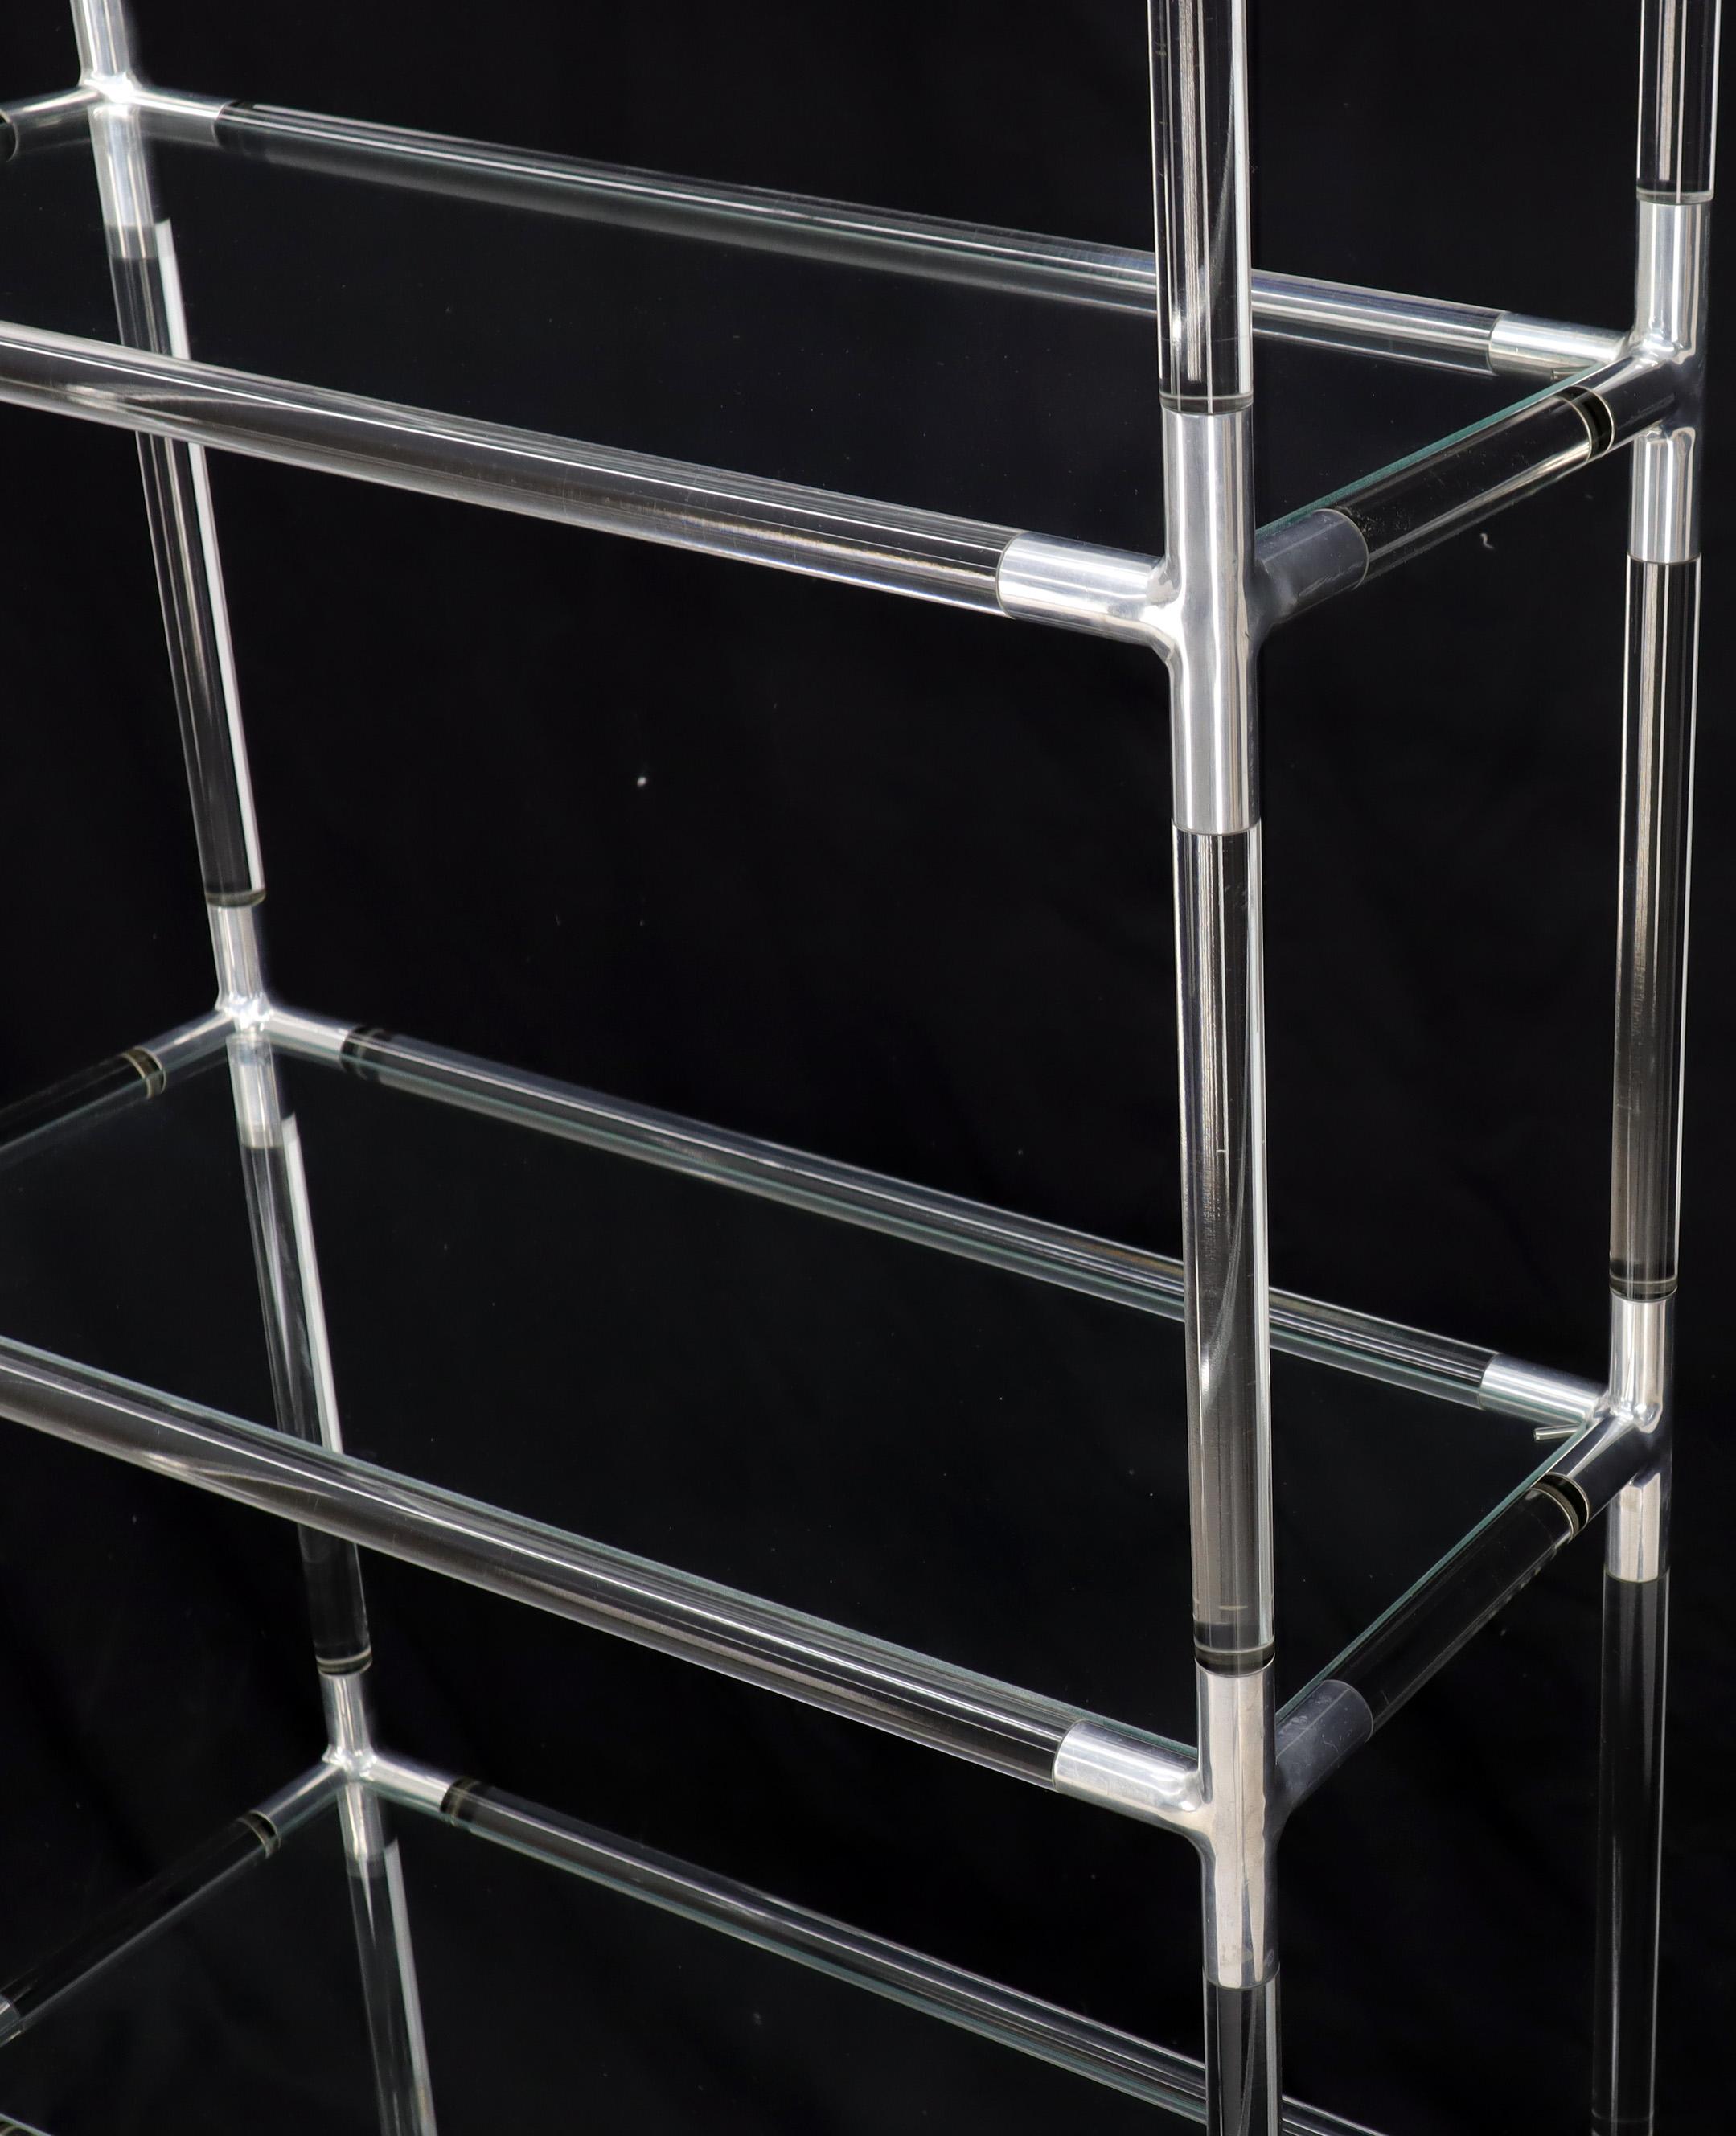 Lucite and Aluminum Mid-Century Modern 5-Tier Etagere Vitrine Shelving Unit In Excellent Condition For Sale In Rockaway, NJ